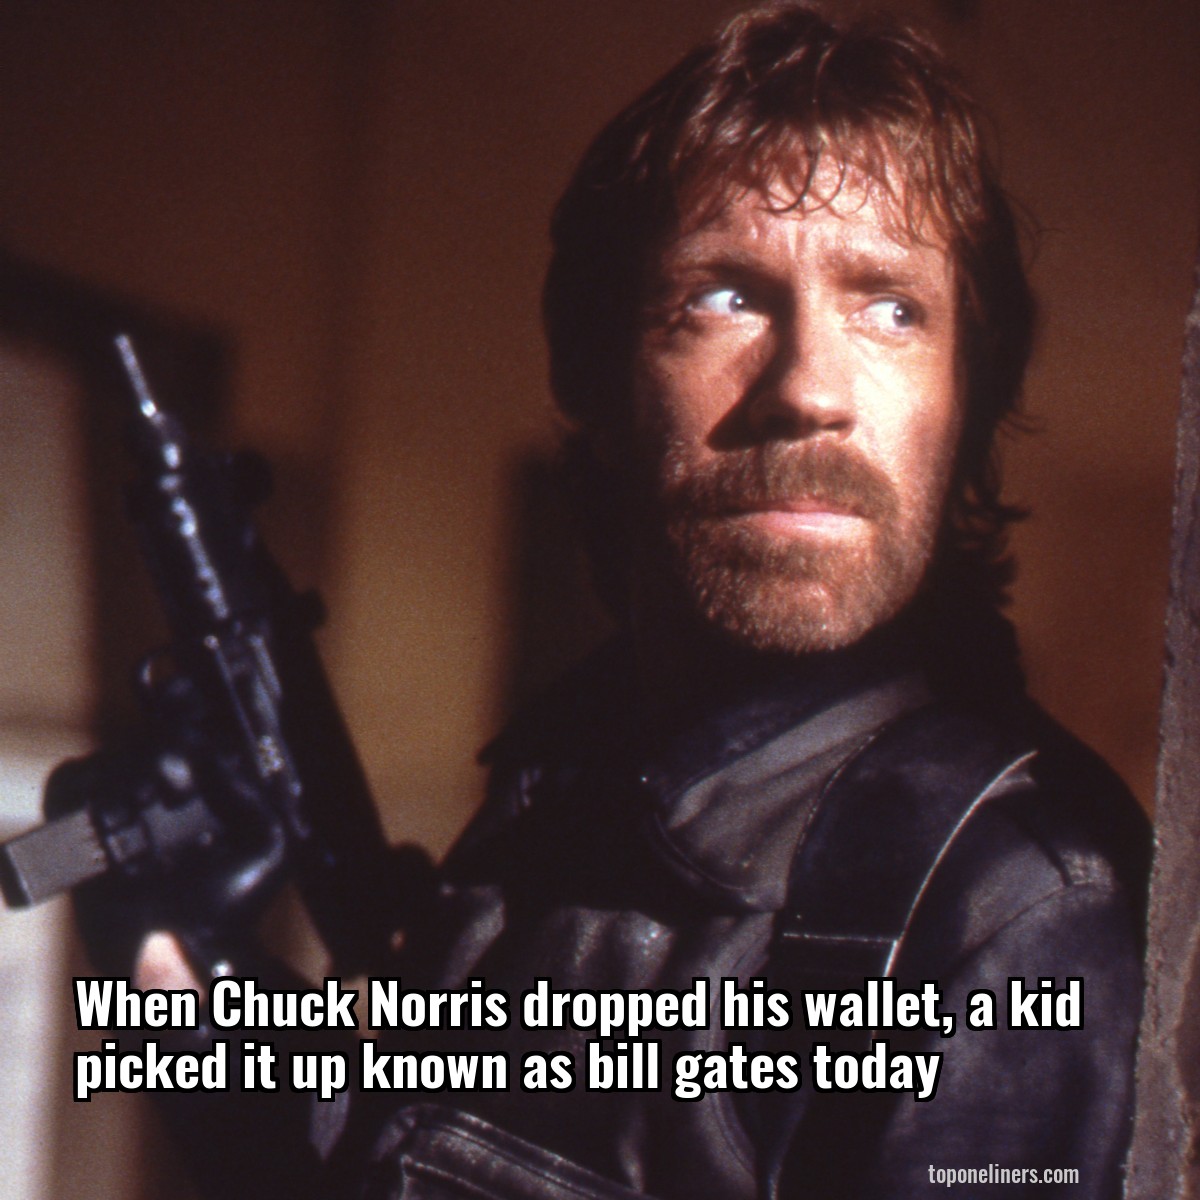 When Chuck Norris dropped his wallet, a kid picked it up known as bill gates today